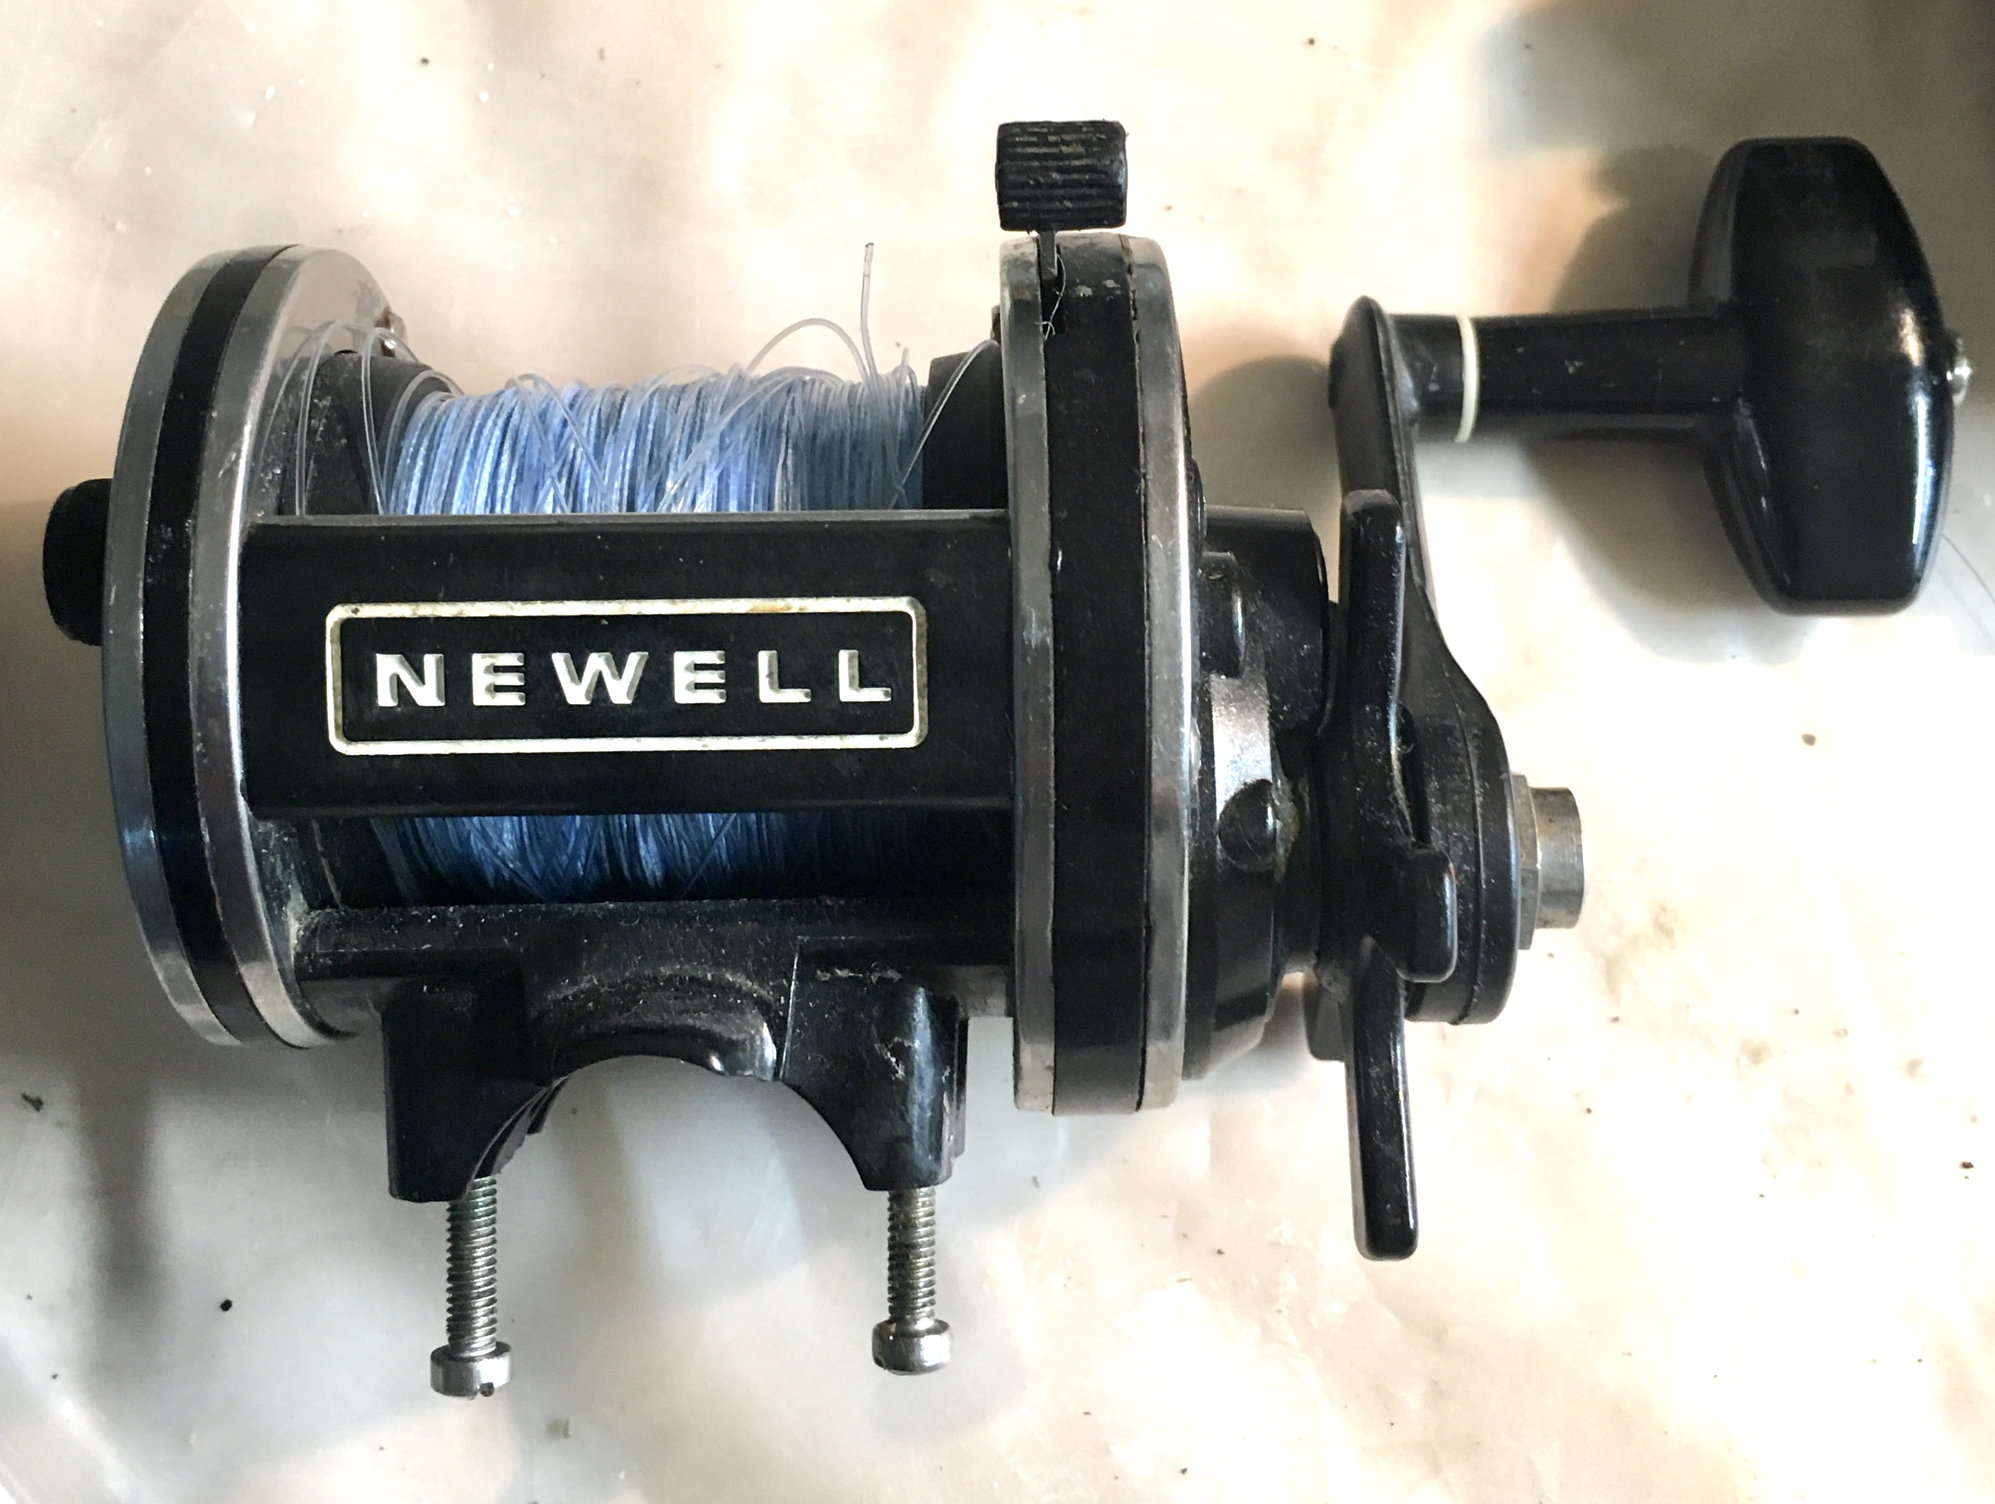 322-5 GRAPHITE NEWELL NARROW NO LETTER CLEAN 90'S REEL SS 5:1 HIGH SPEED  GEARS